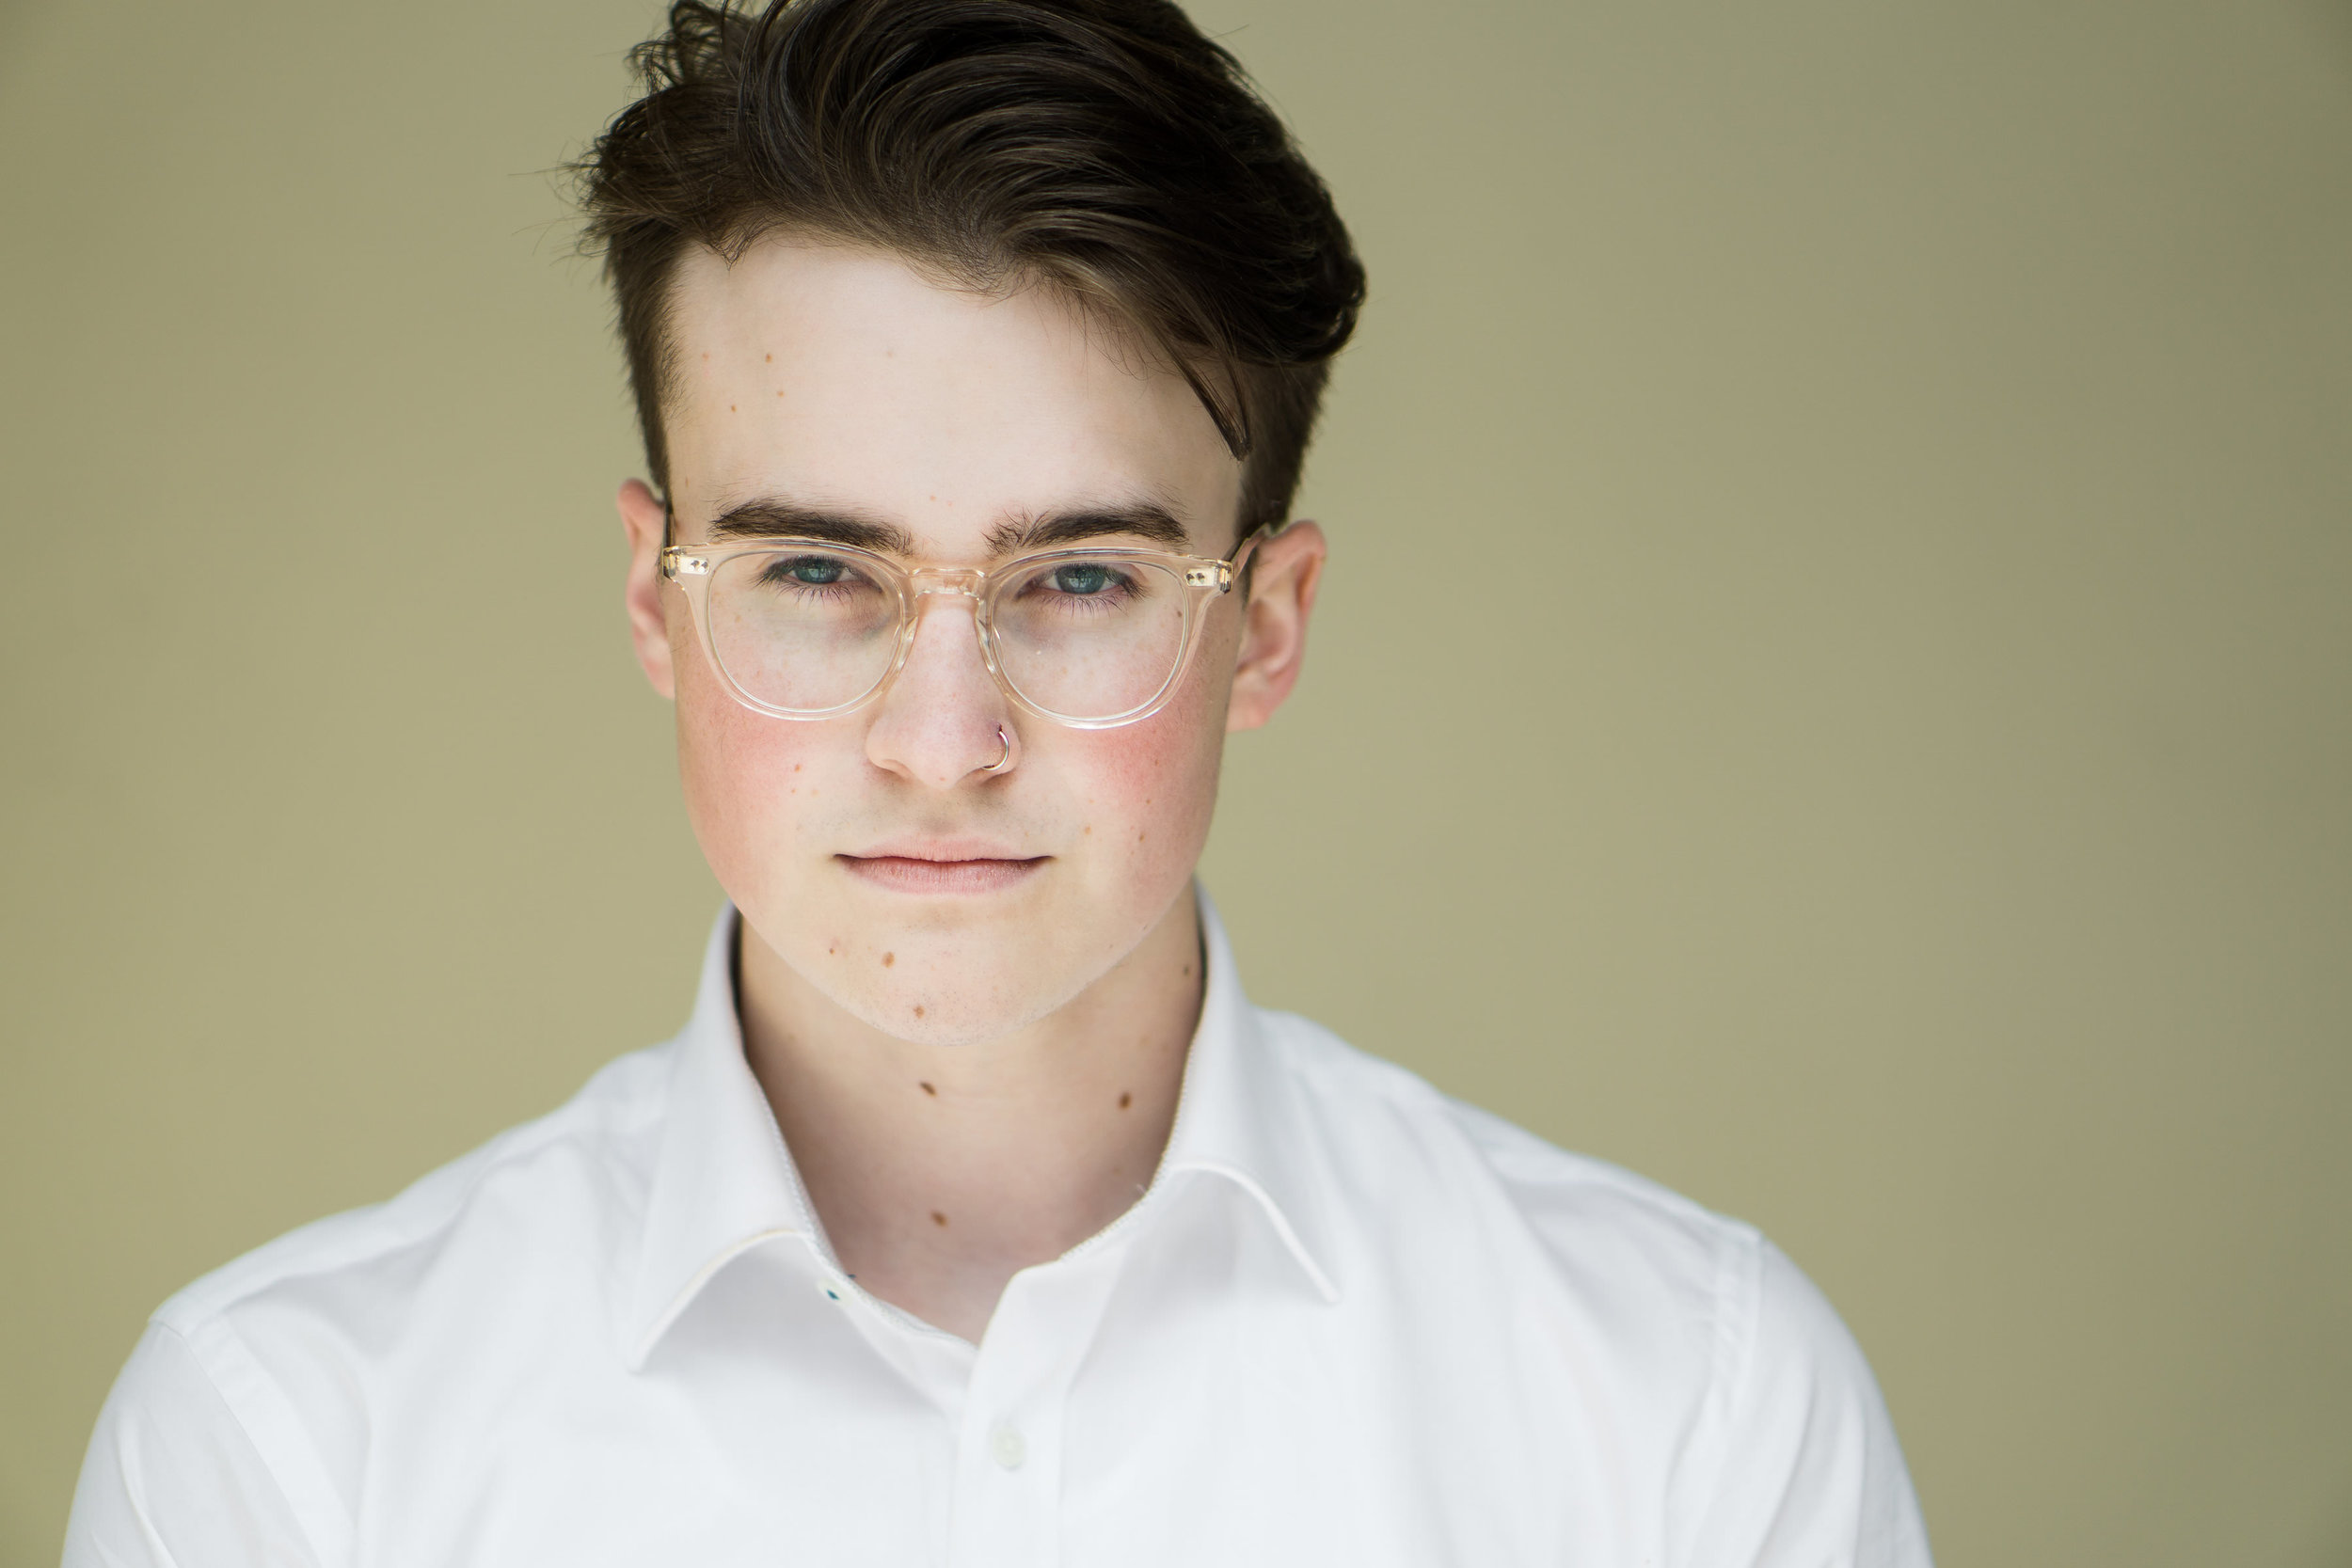 actor with glasses headshot